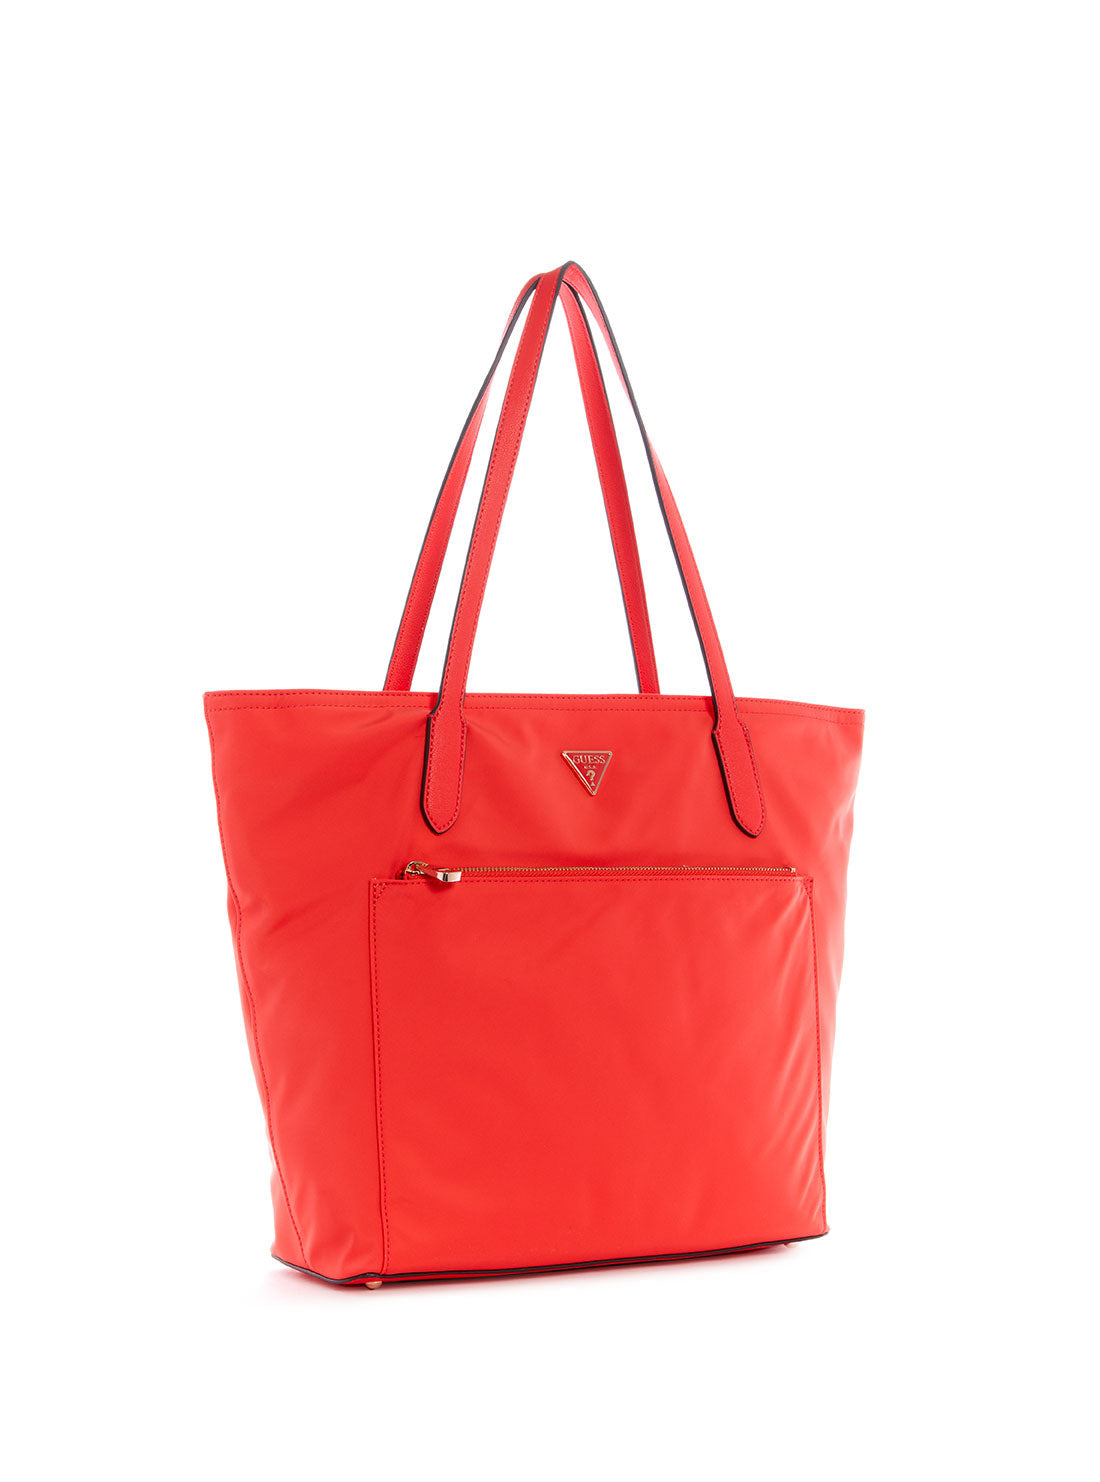 Eco Red Gemma Tote Bag - GUESS